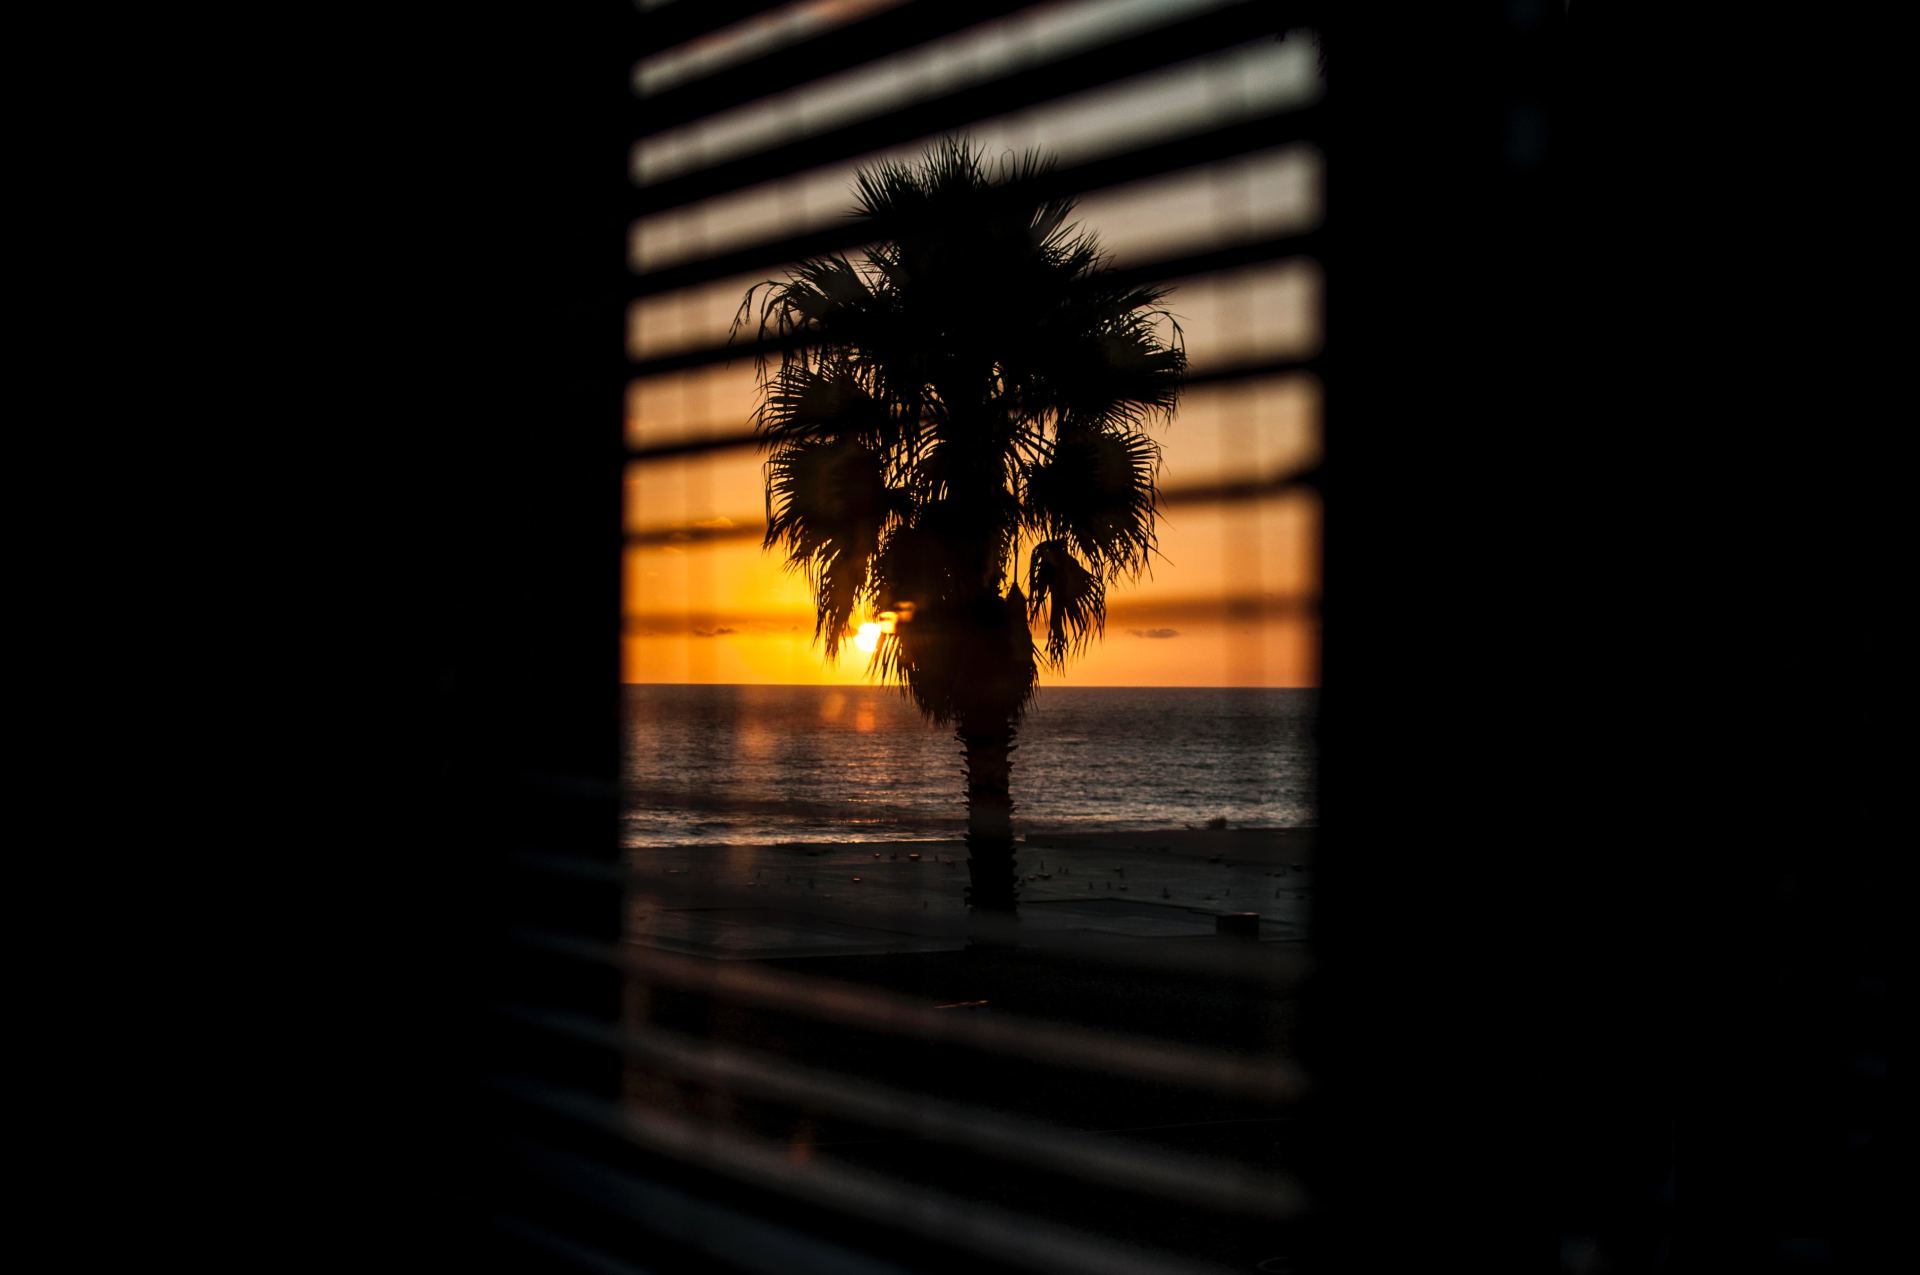 palm tree through blinds